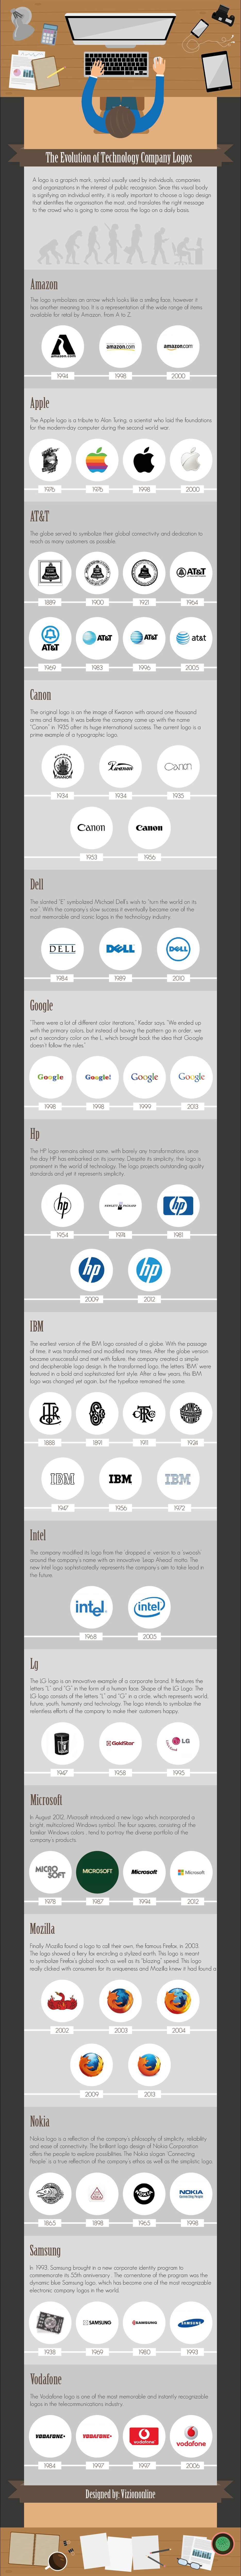 The Evolution of Technology Company Logos infographic